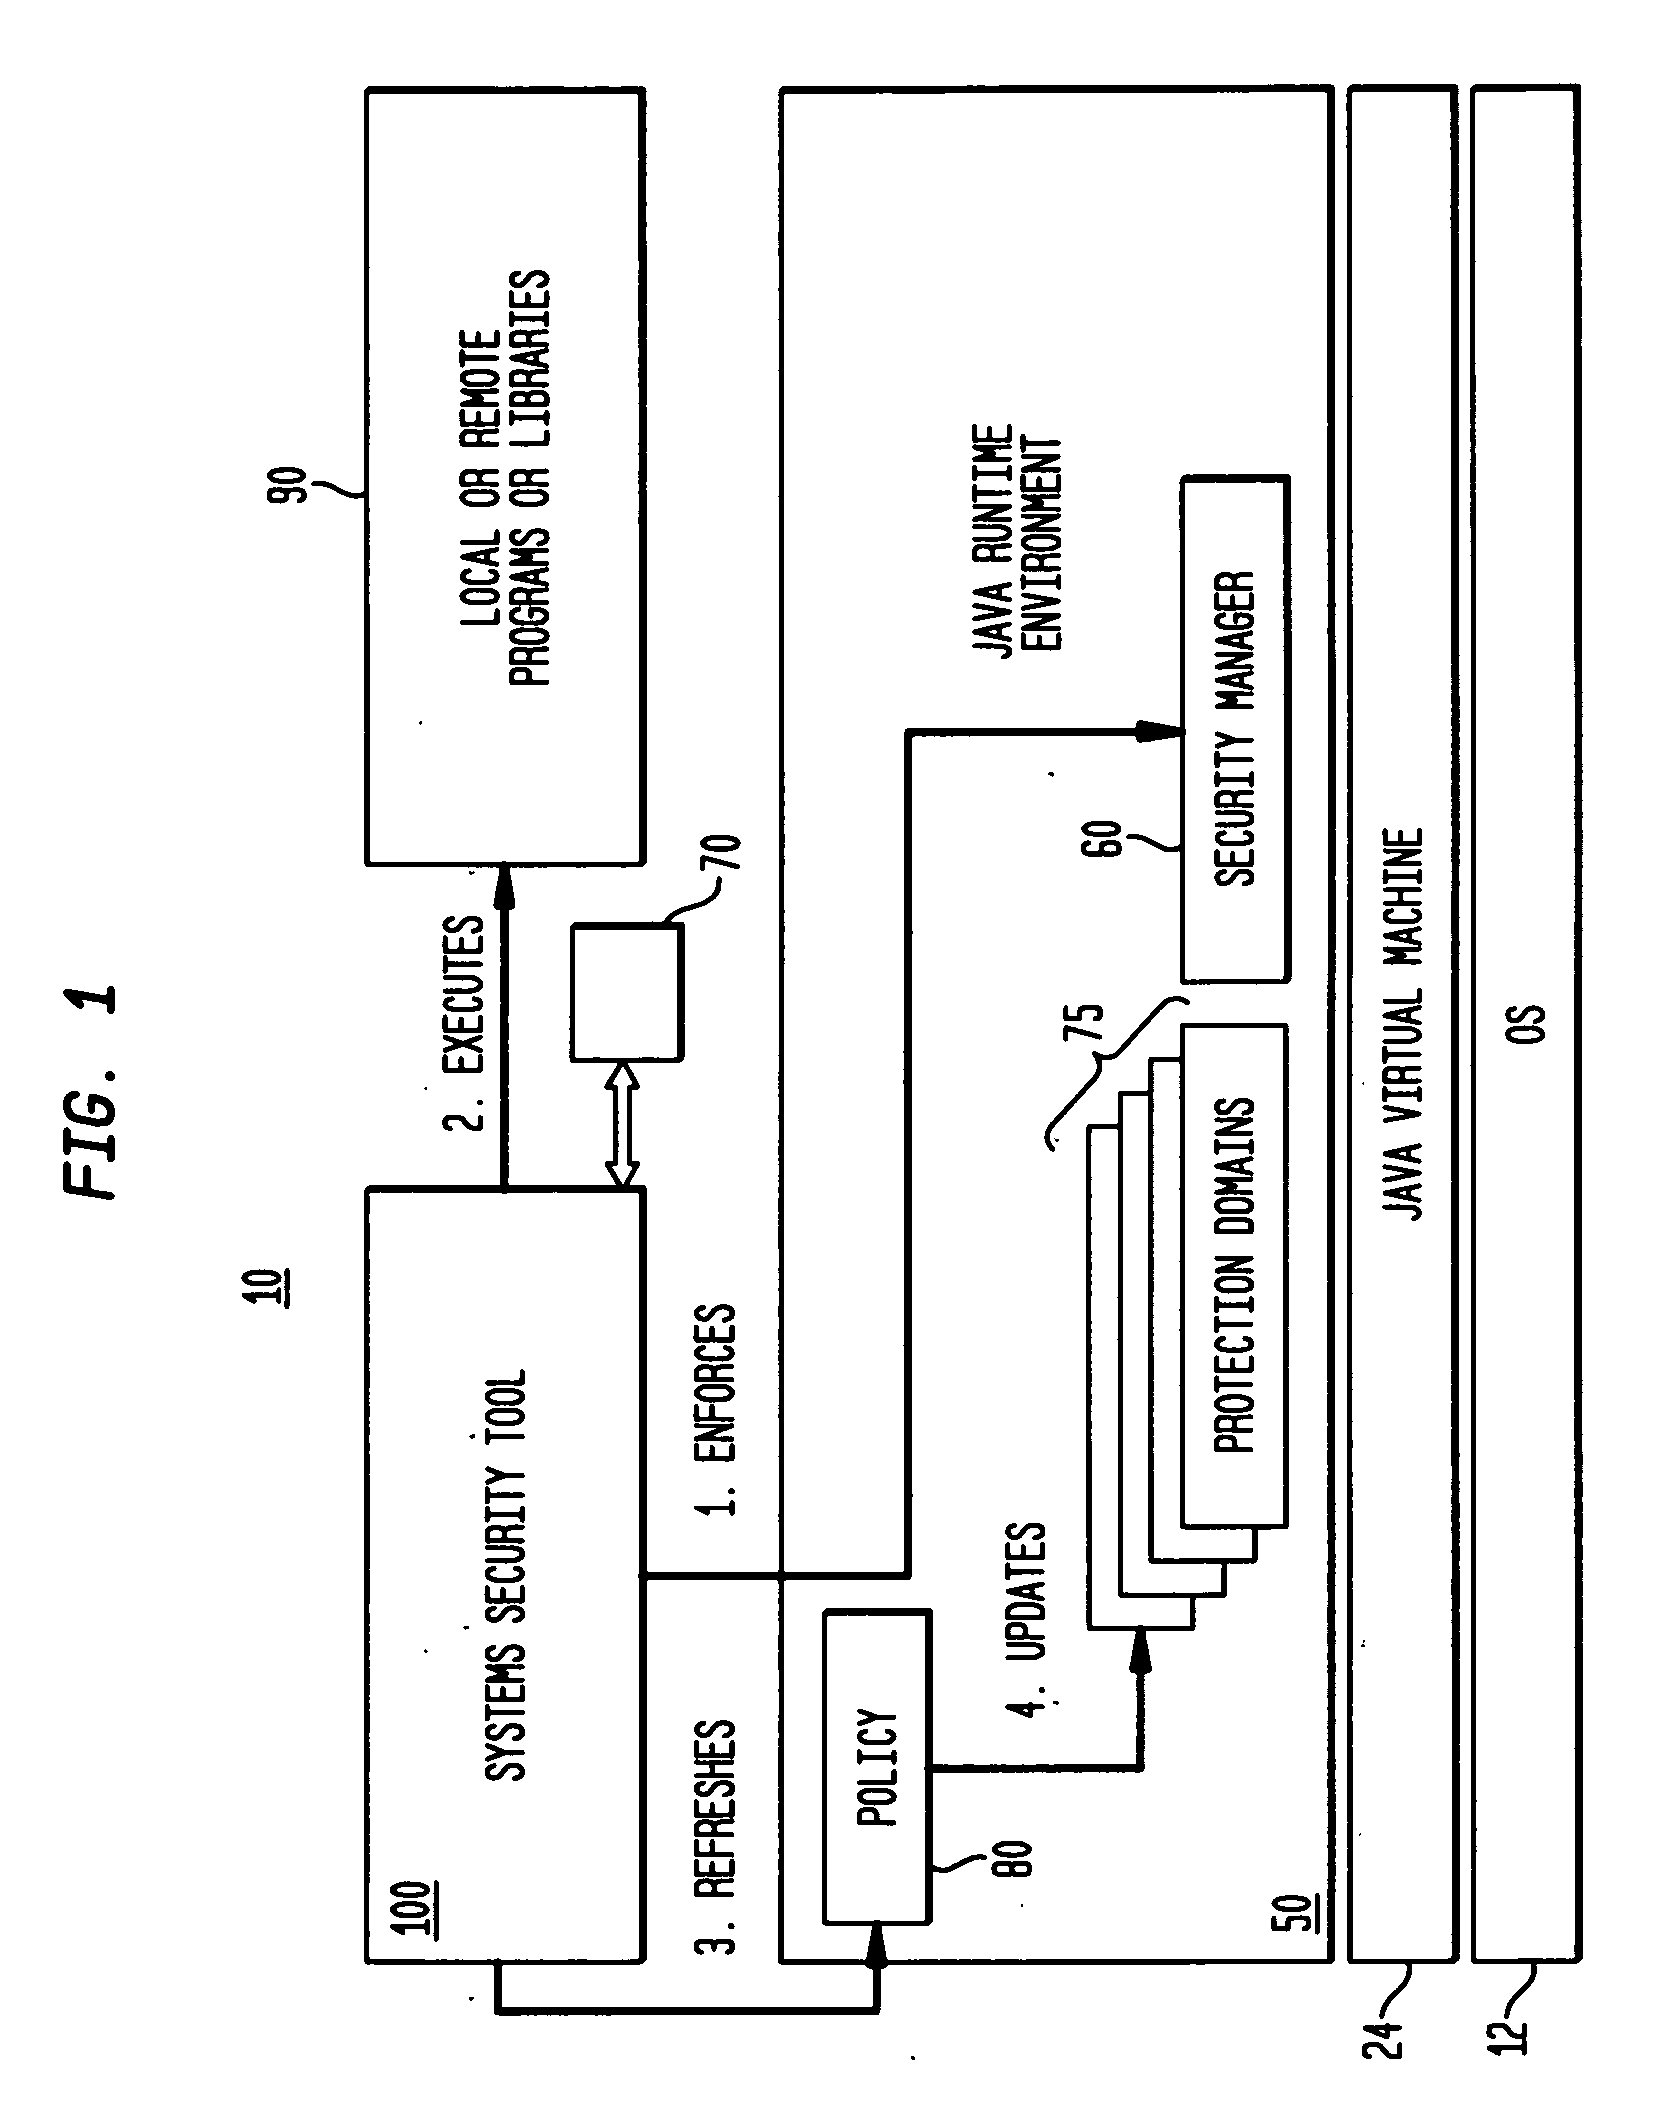 Method and system for run-time dynamic and interactive identification of software authorization requirements and privileged code locations, and for validation of other software program analysis results